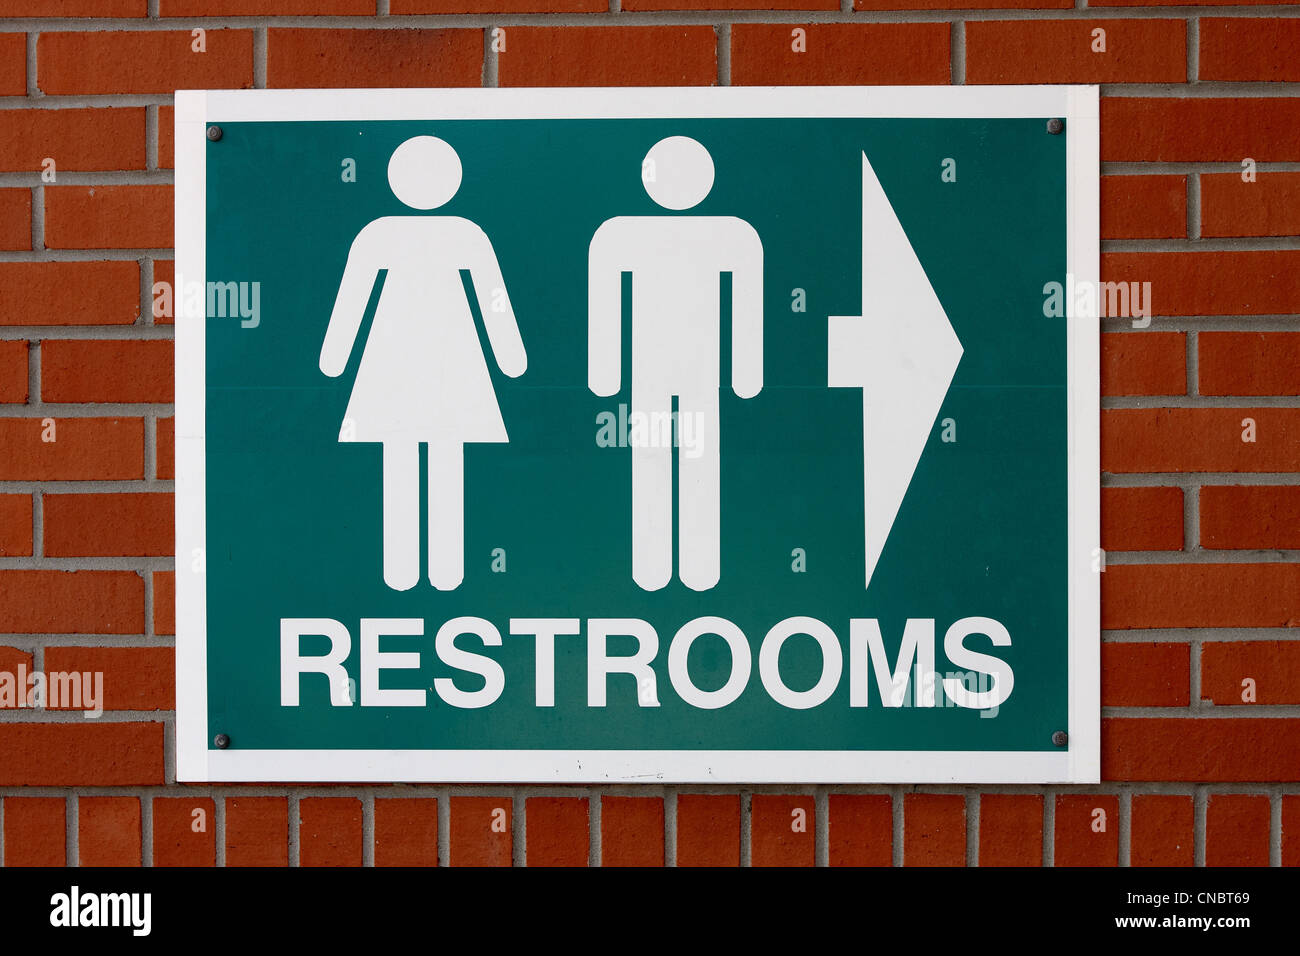 Restrooms sign on a red brick wall Stock Photo